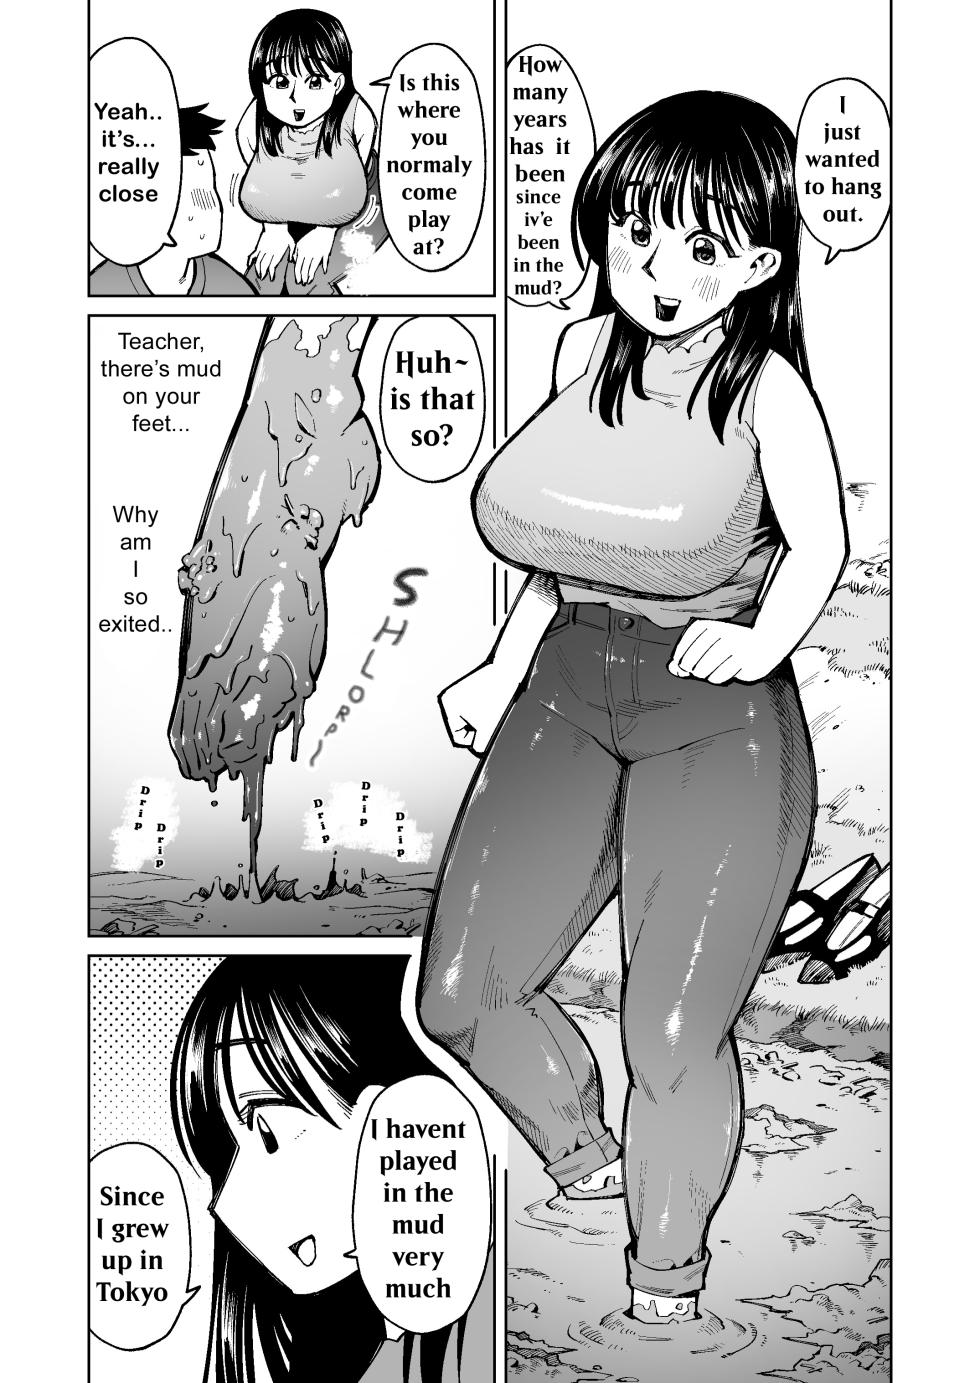 I pulled my favorite teacher into a rice field and had sex with her covered in mud! [WAM] - Page 3